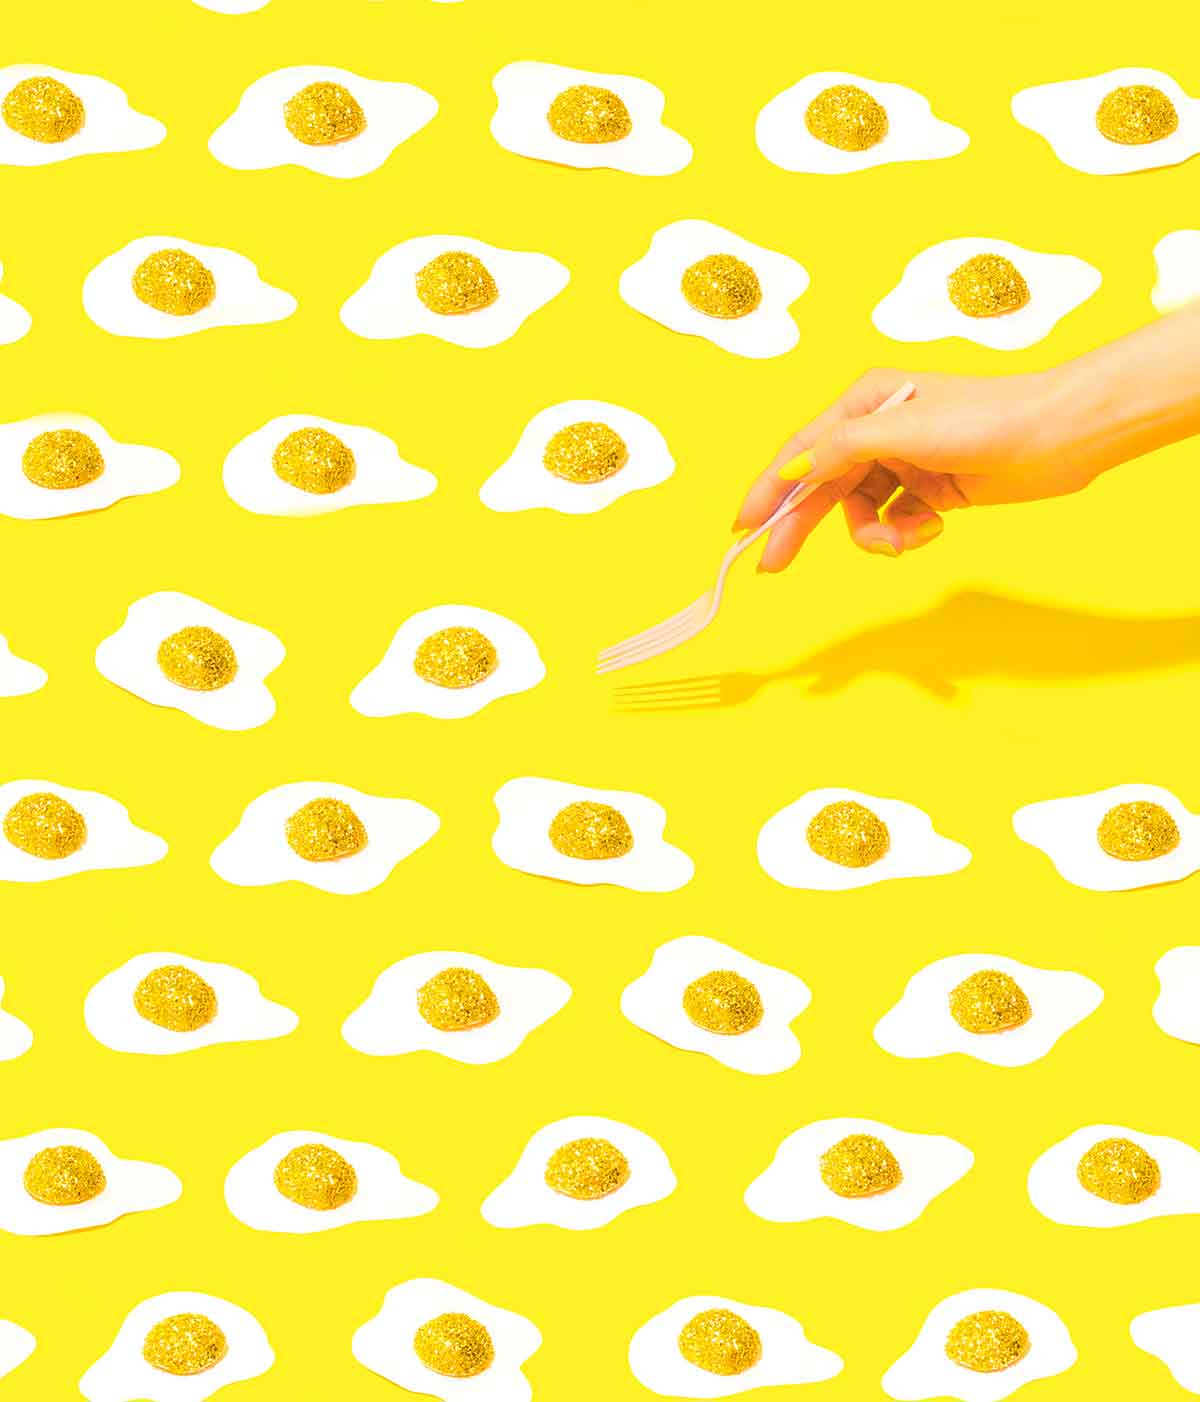 Yellow background with any fried eggs and a woman's hand with a fork